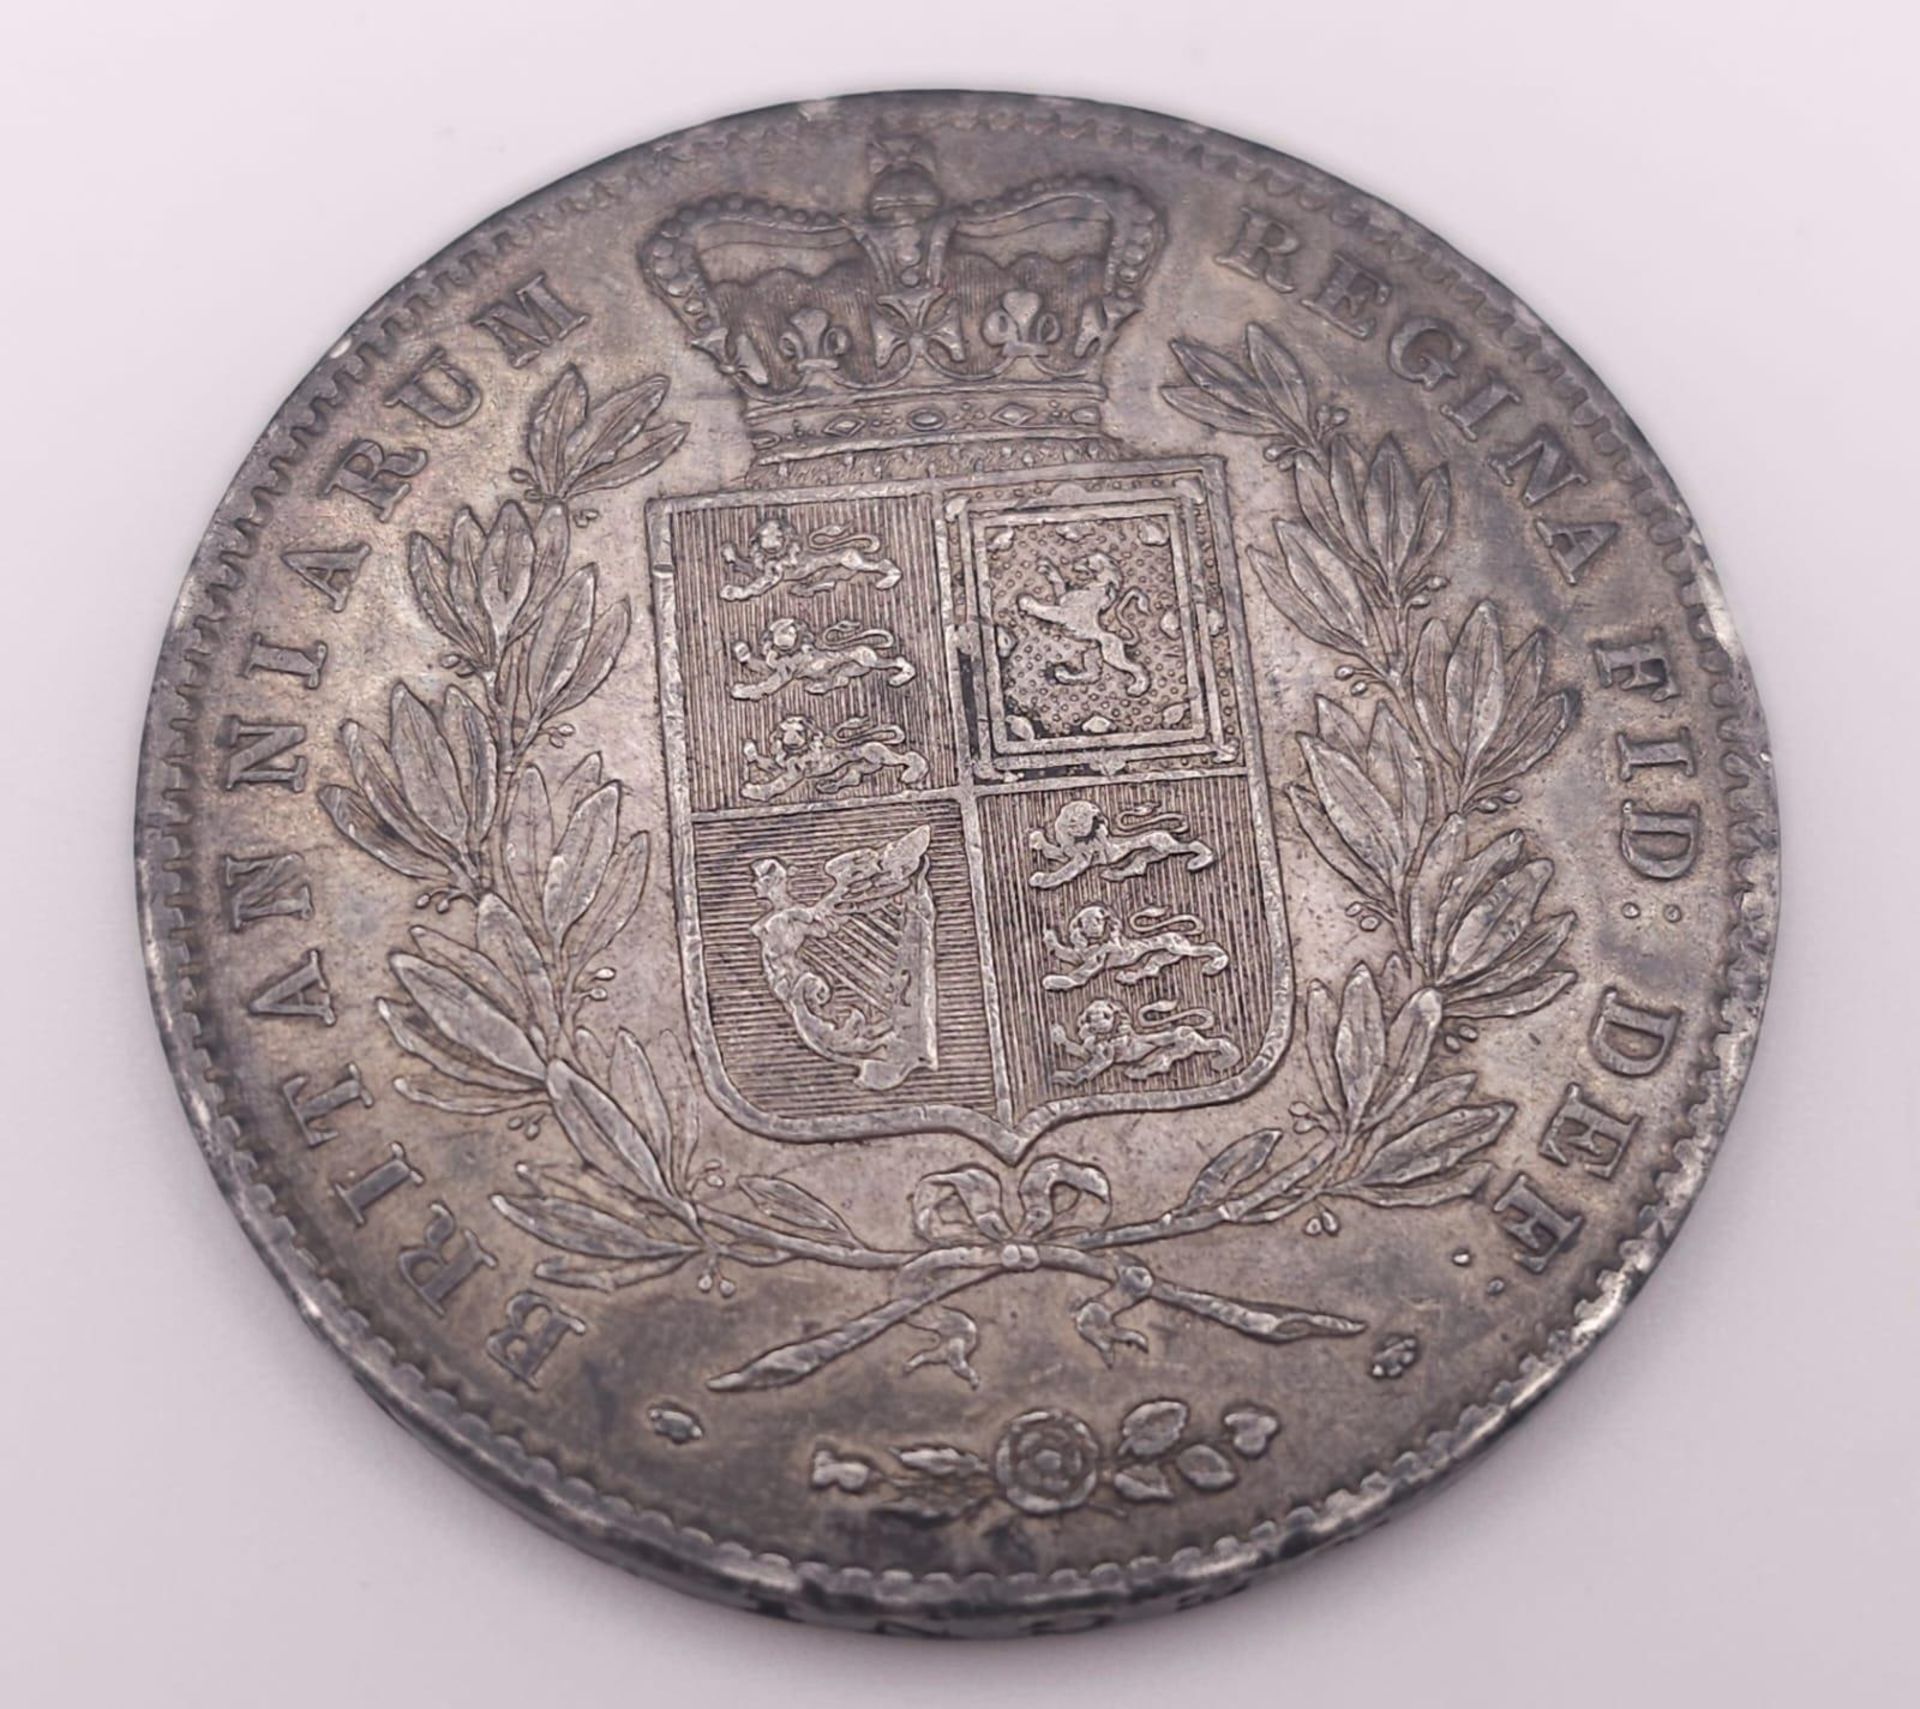 Withdrawn - An 1844 Queen Victoria (Young Head) Silver Crown. High grade but please see photos. - Image 5 of 10